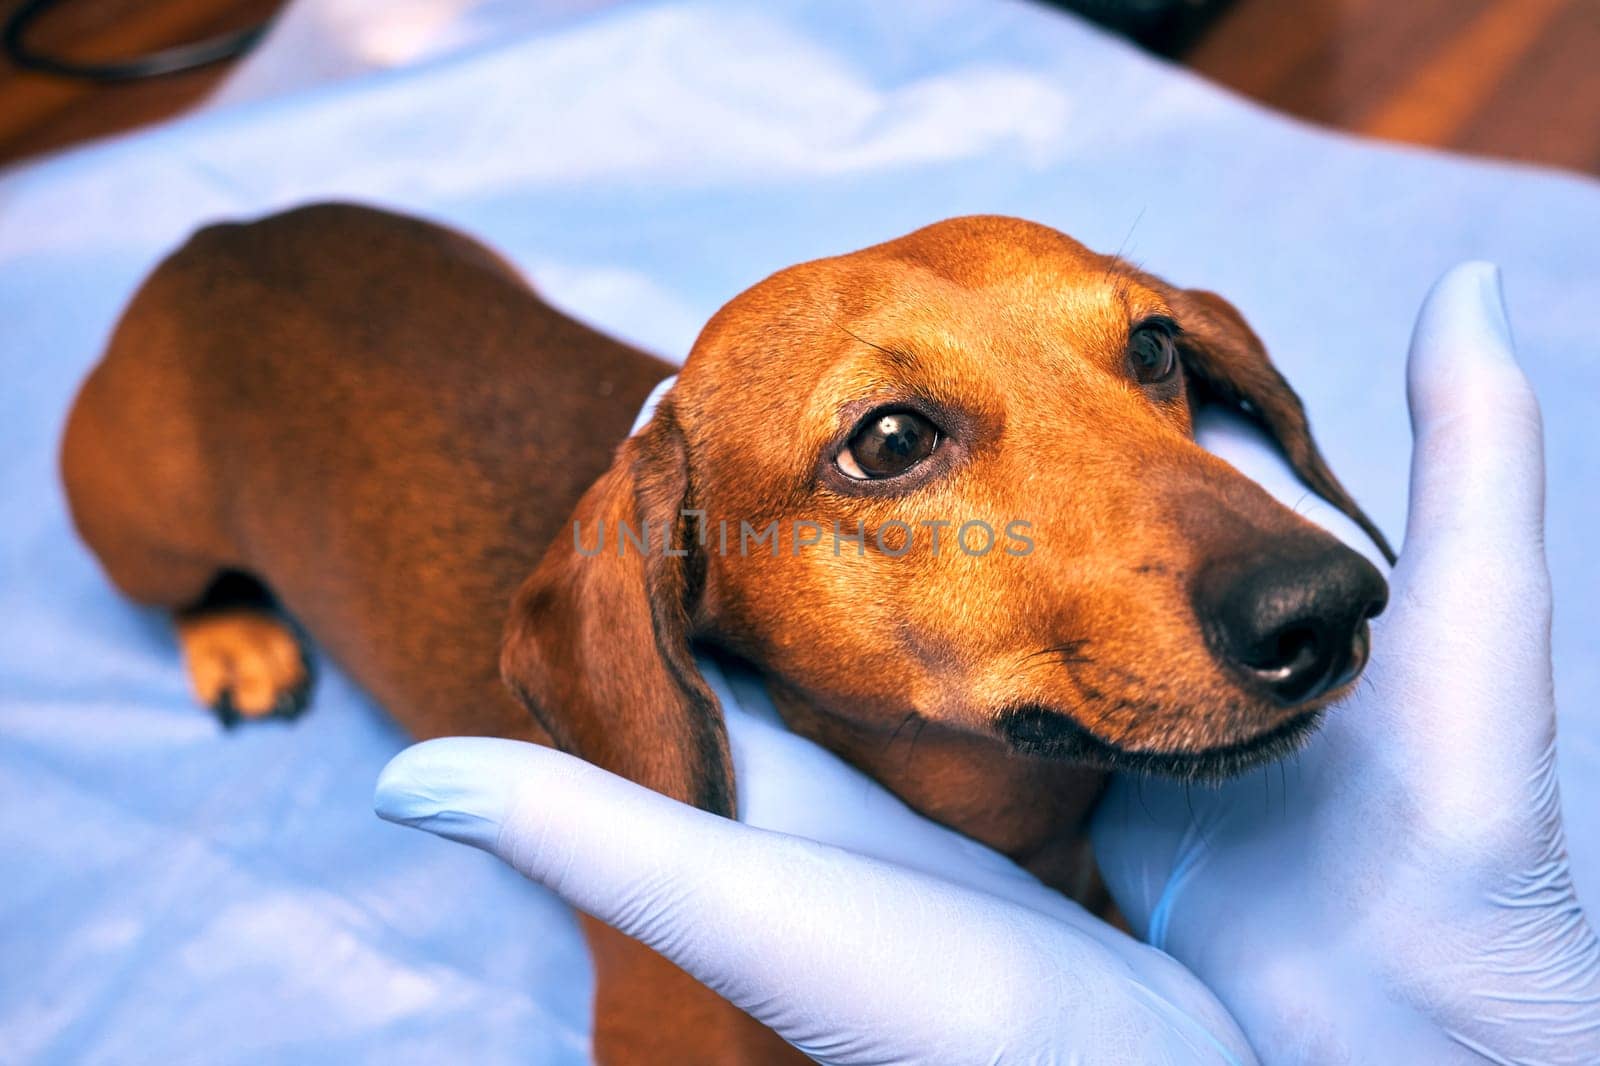 Examination of a dog in a veterinary clinic. Hands of a veterinarian in gloves holding a dog by the head